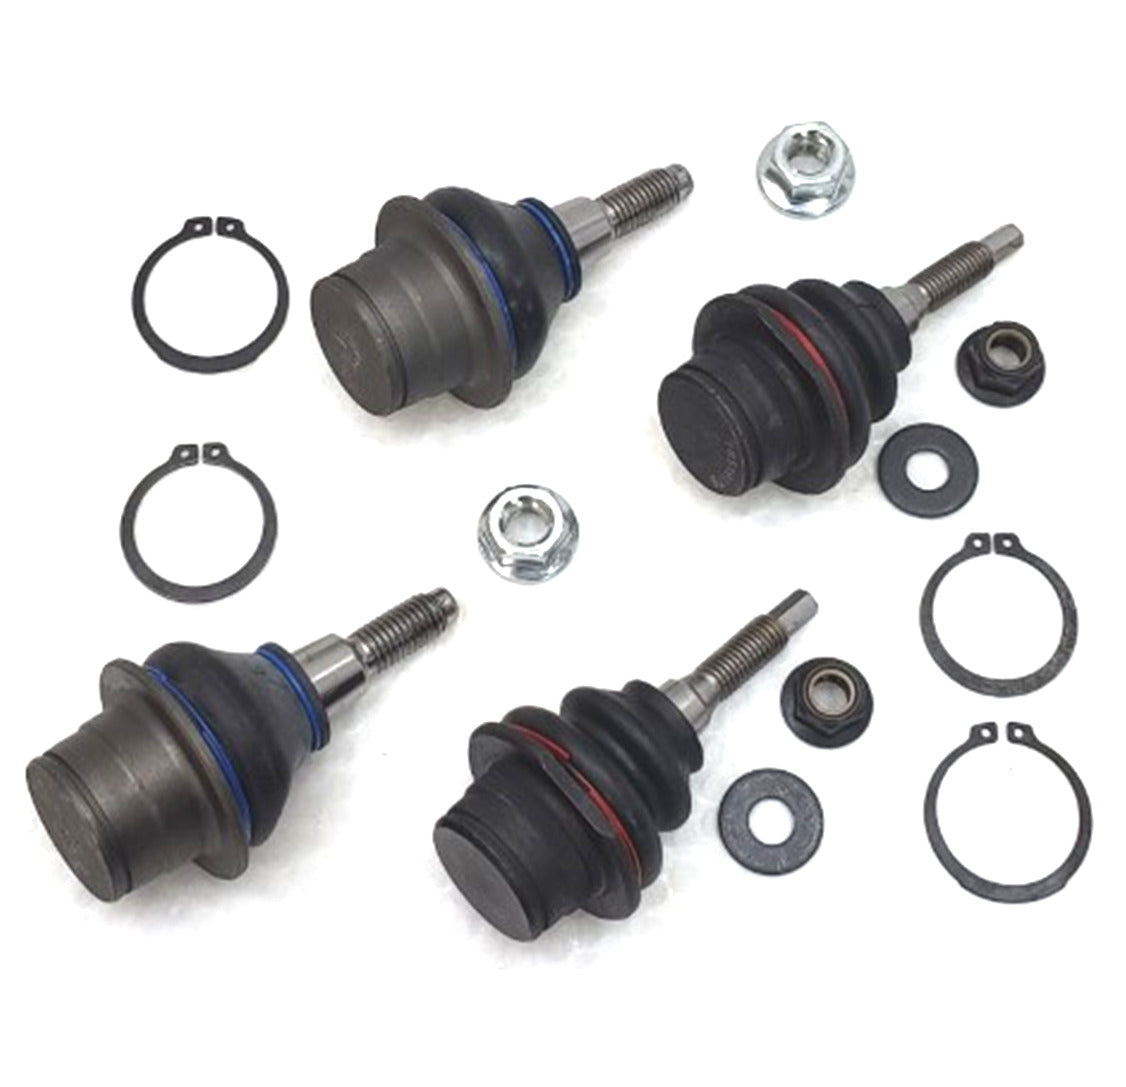 HD Lower Ball Joints Upper Ball Joints Suspension Kit for 2015-2020 Ford F150 4x4